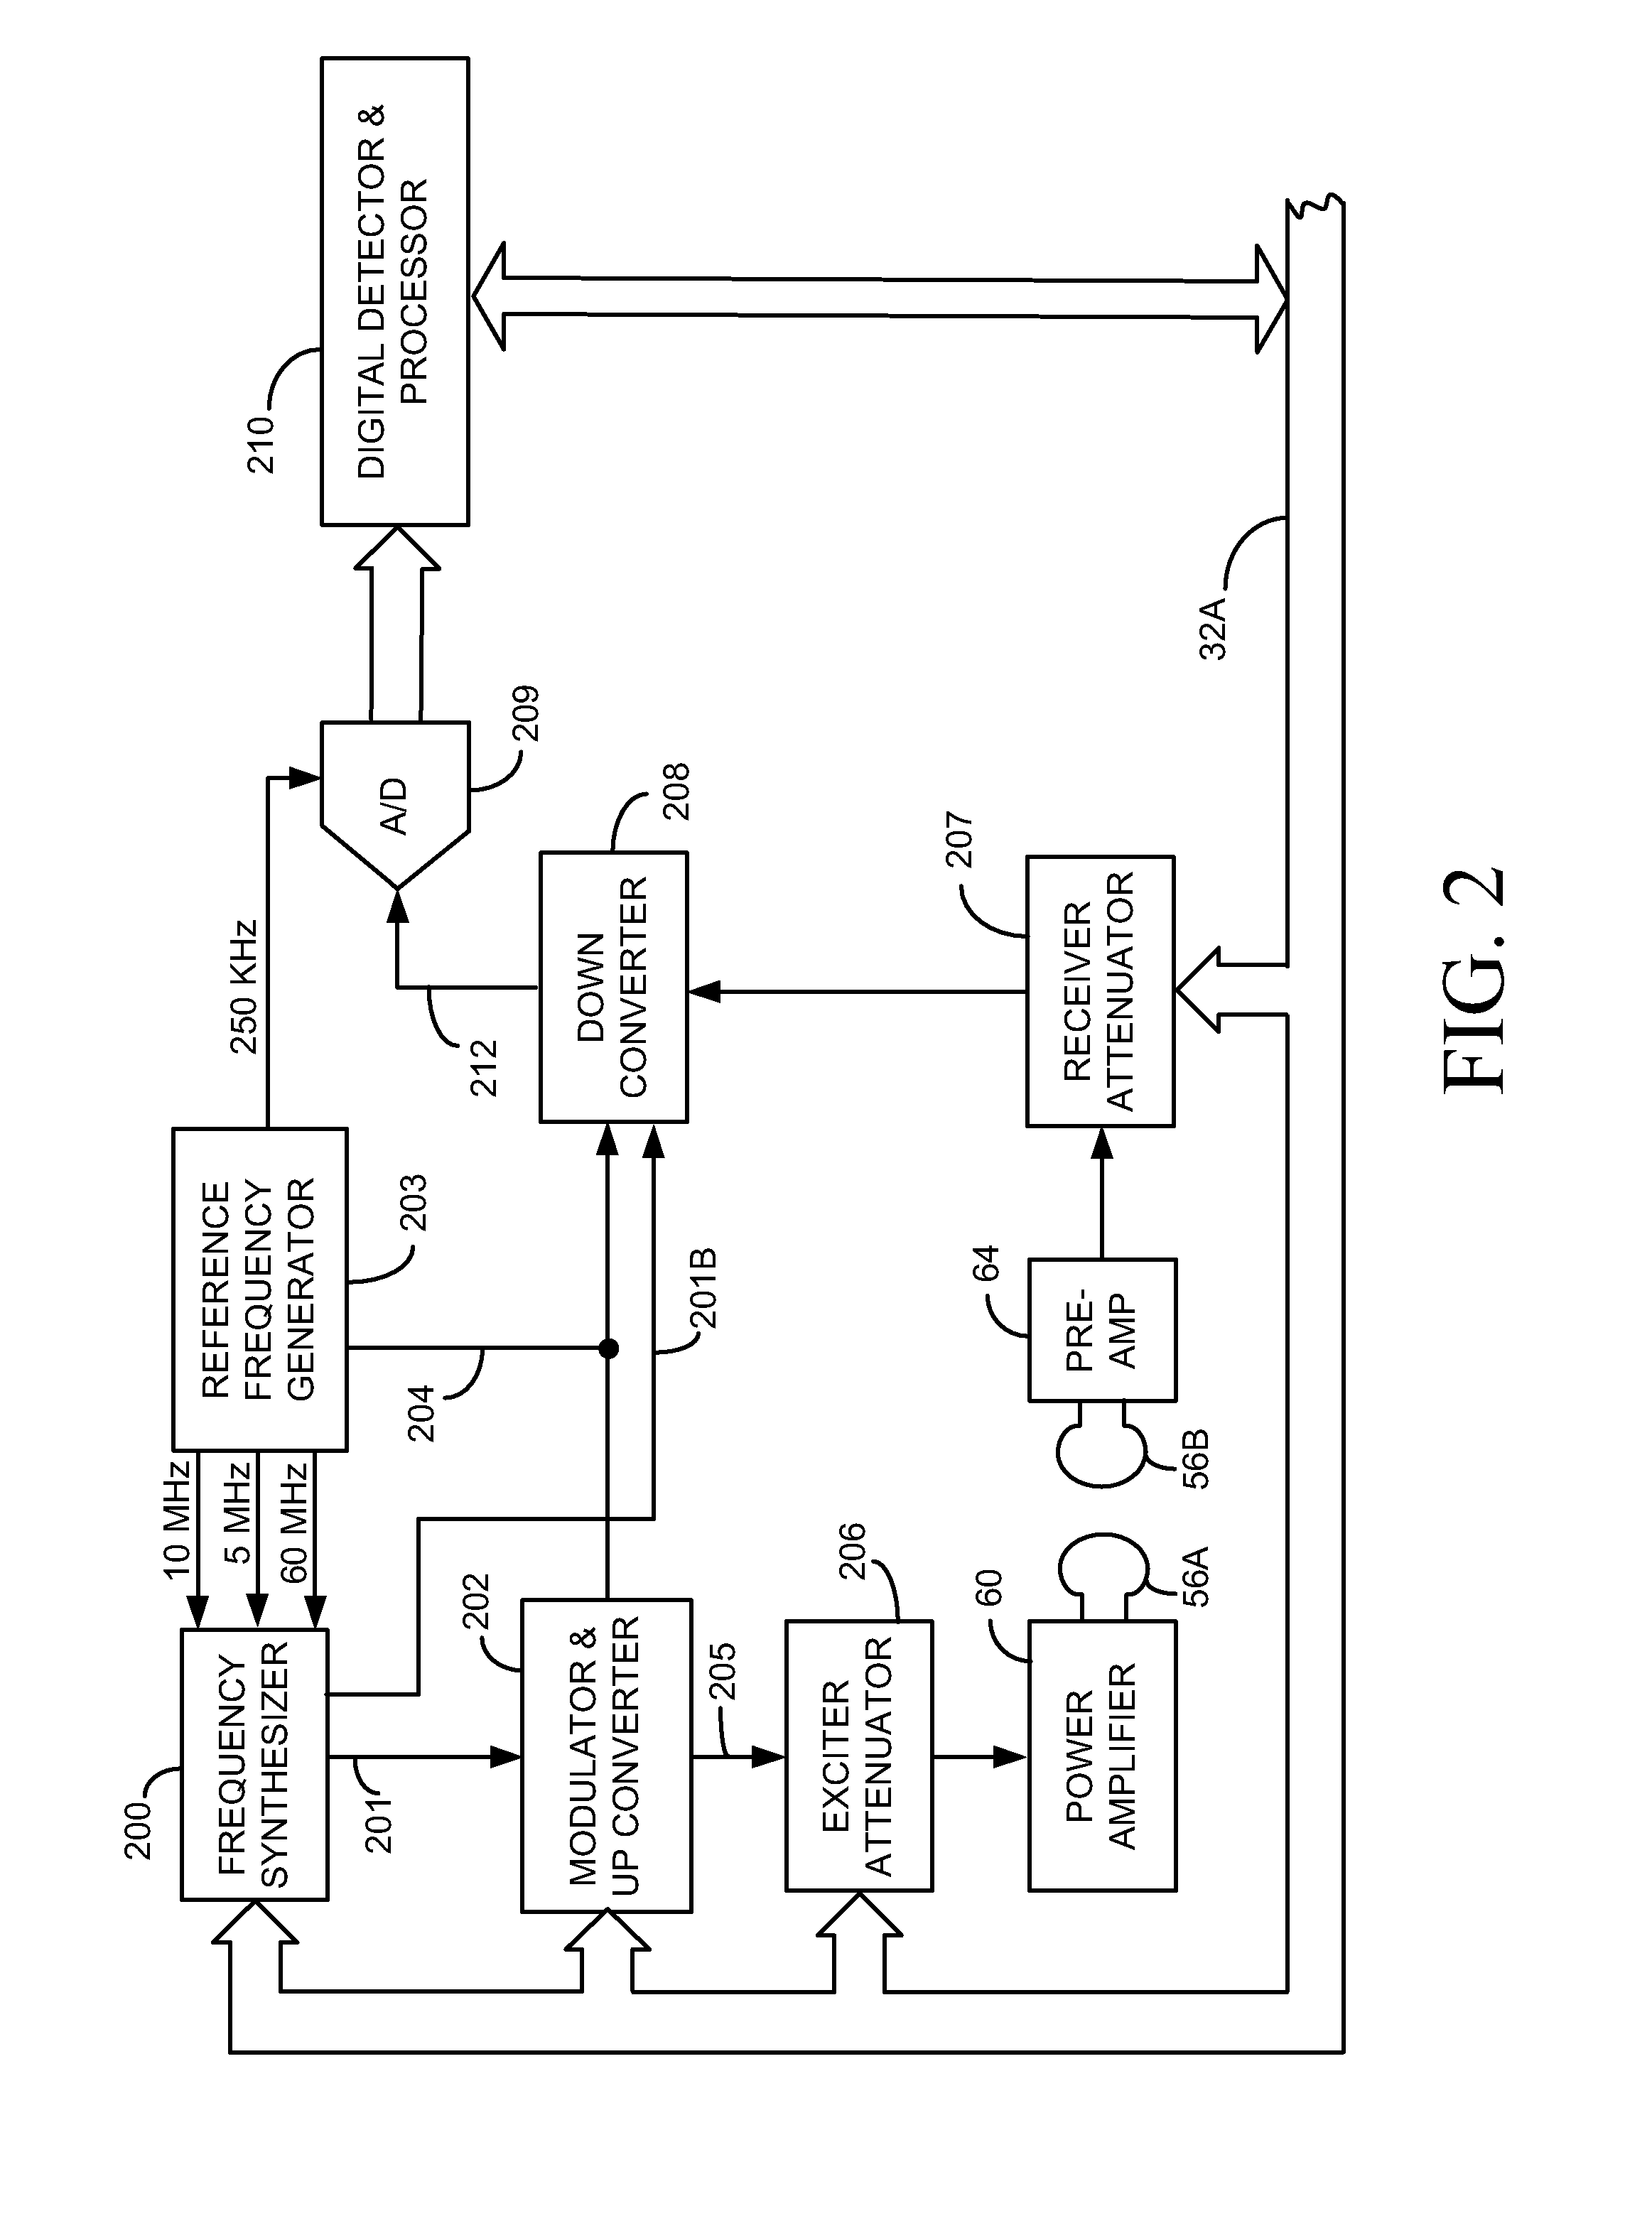 Method and apparatus for acquiring magnetic resonance imaging data